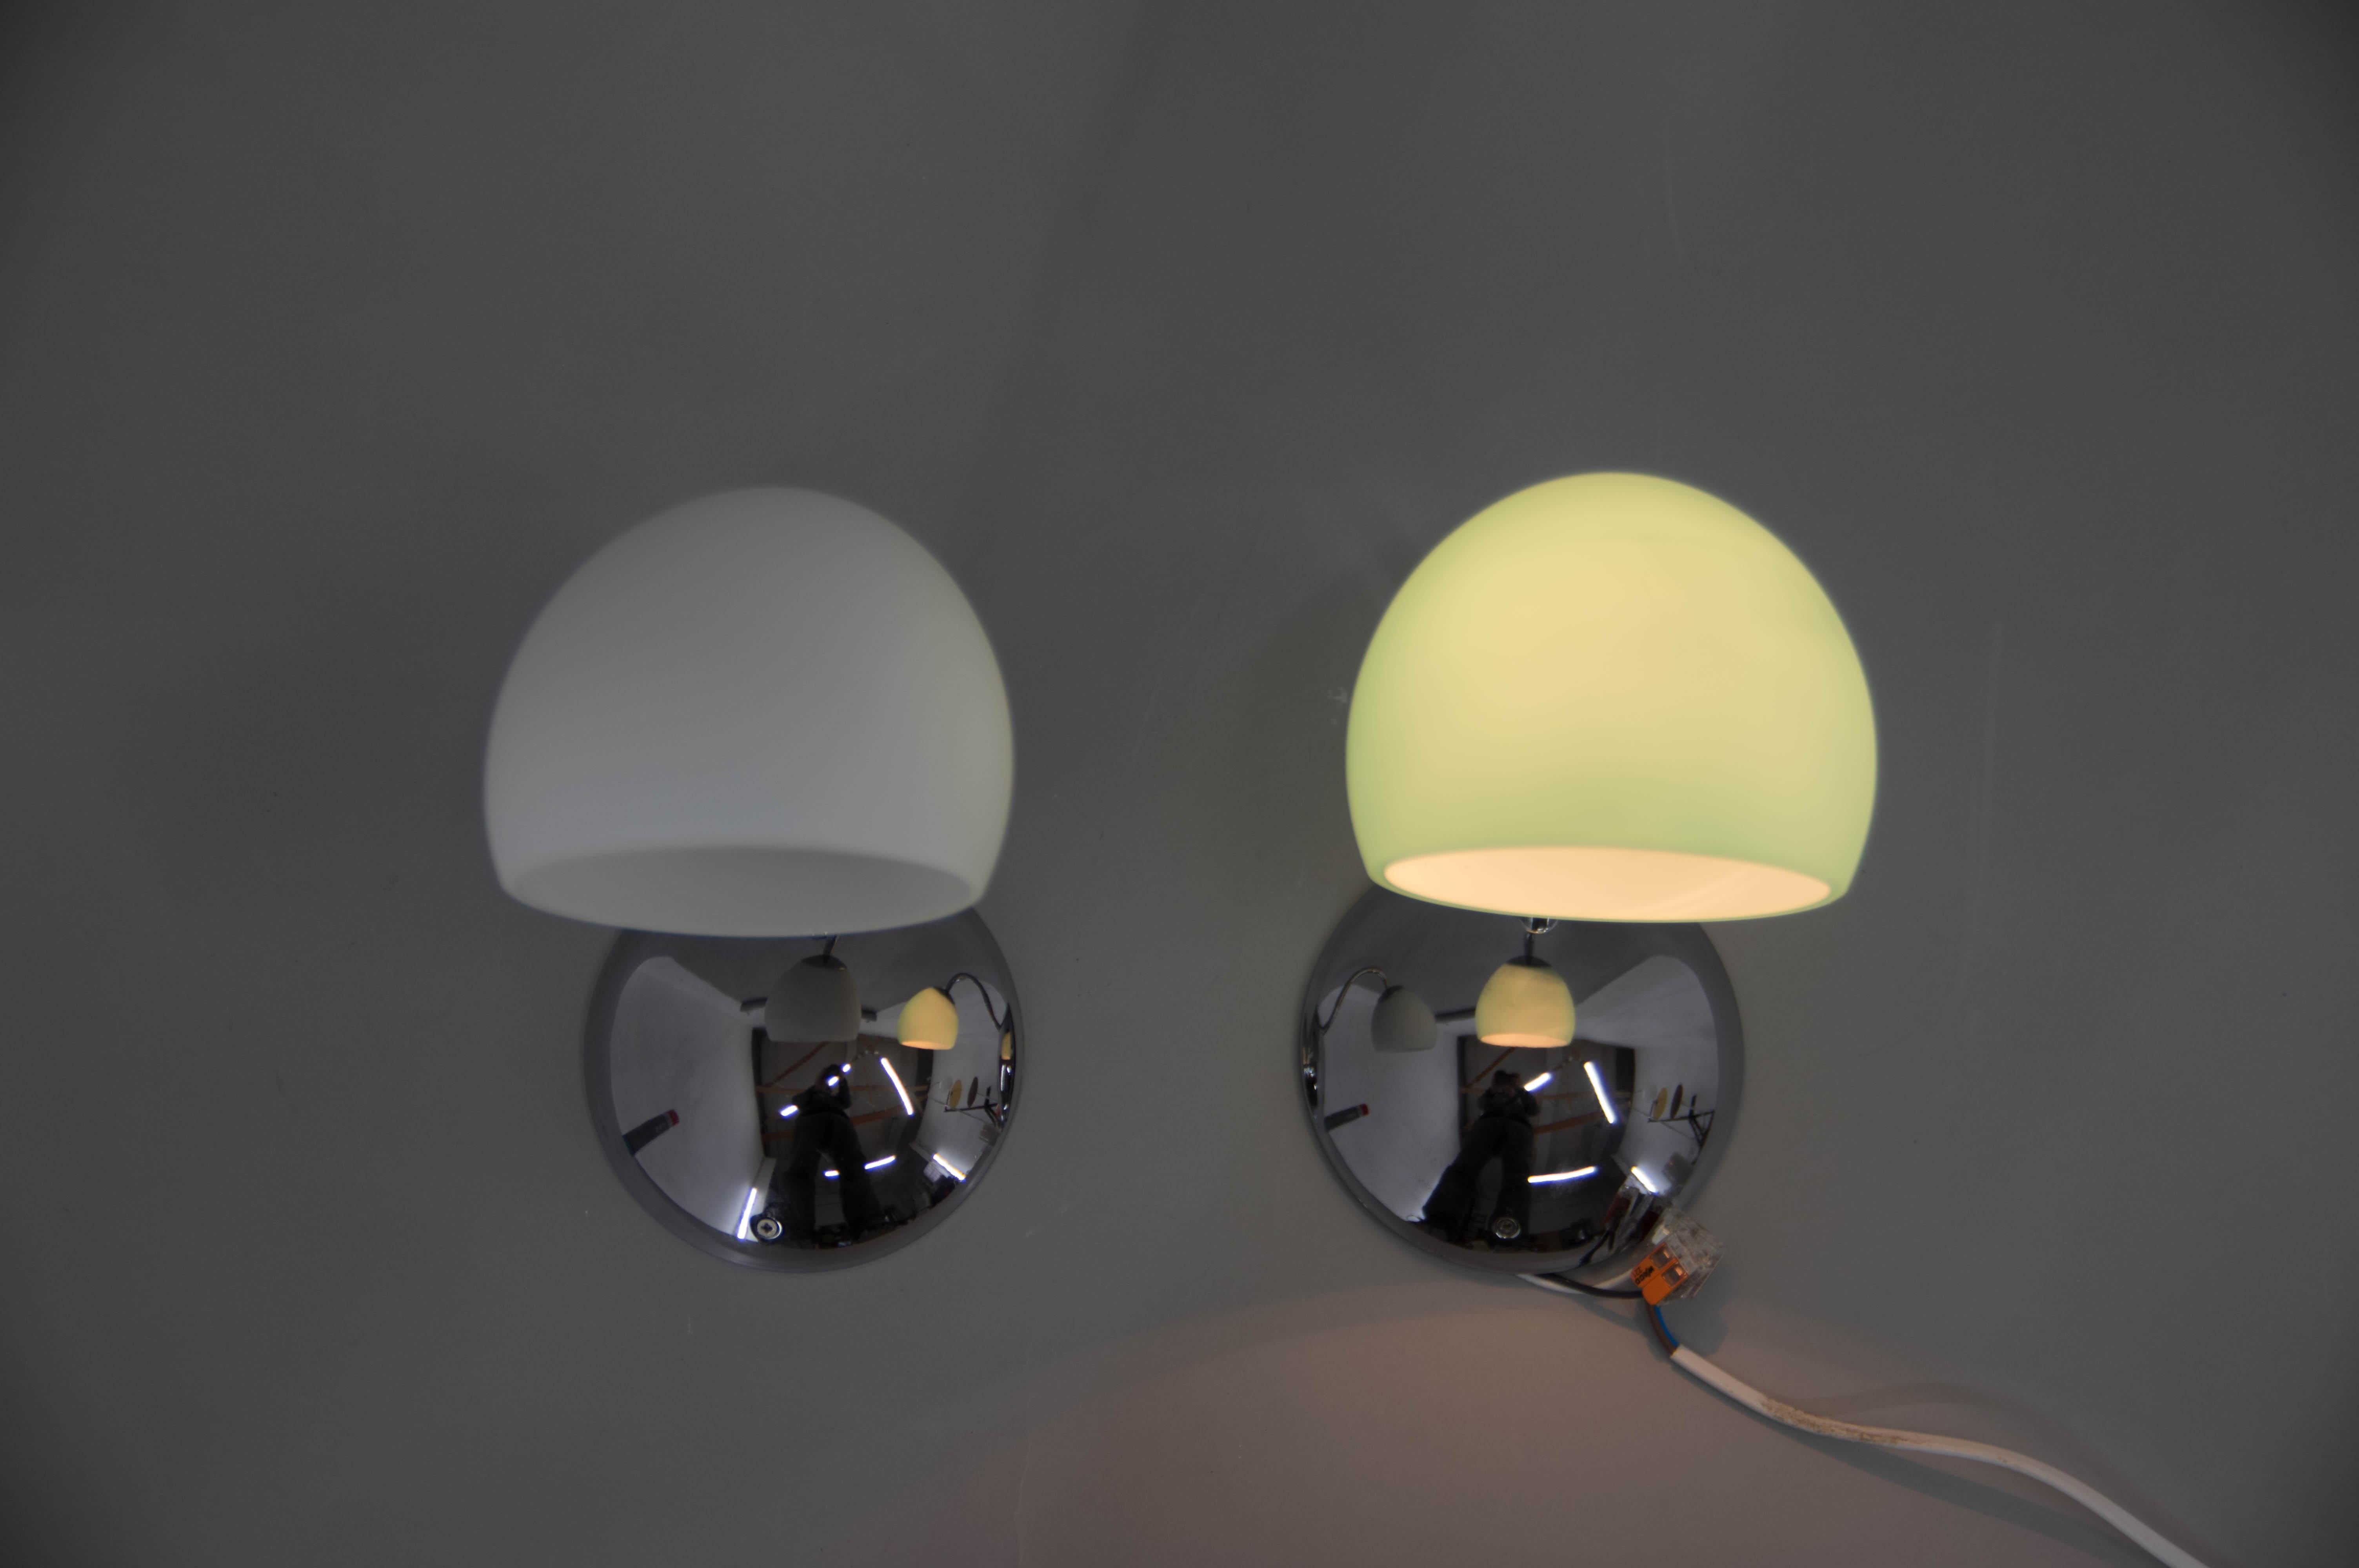 Set of Two Leucos P3 Wall Lights designed by Toso & Massari, Italy, 2010 For Sale 4